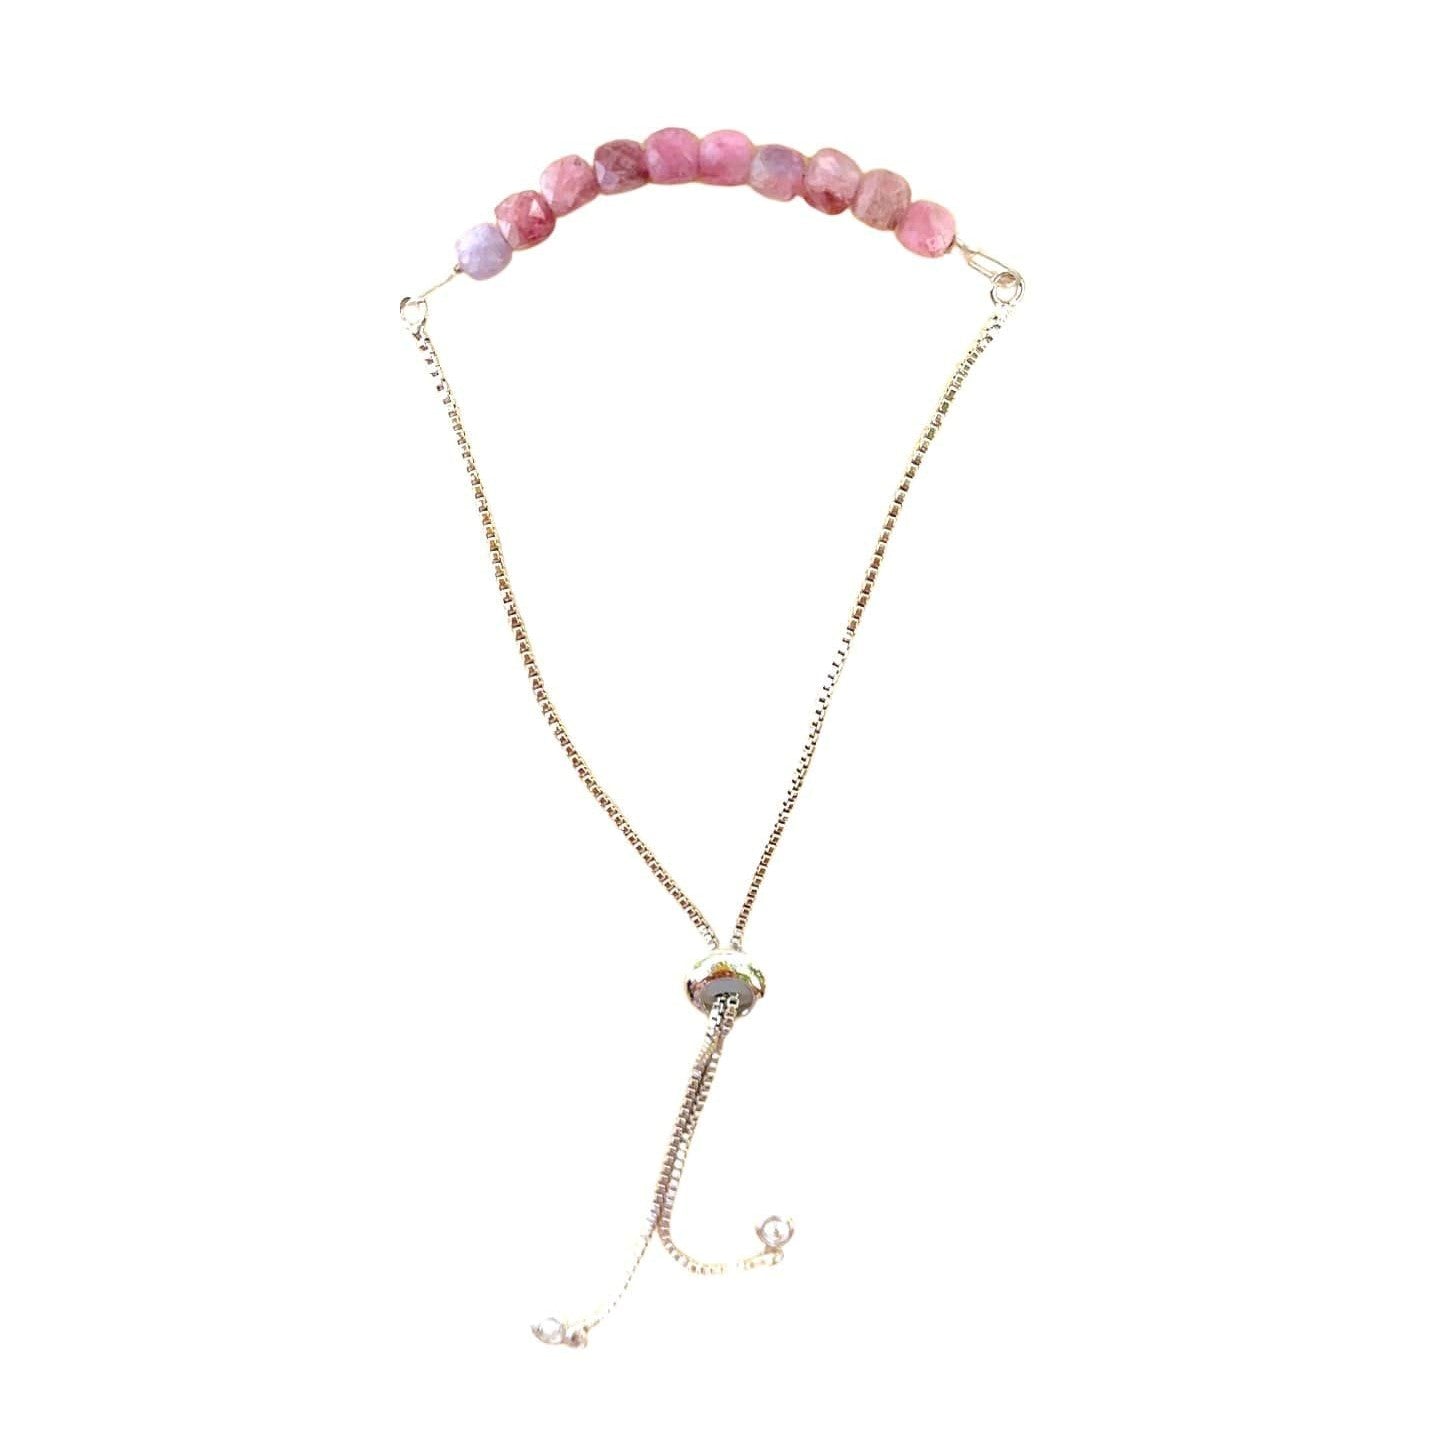 healing crystal bracelets pink tourmaline with adjustable chain